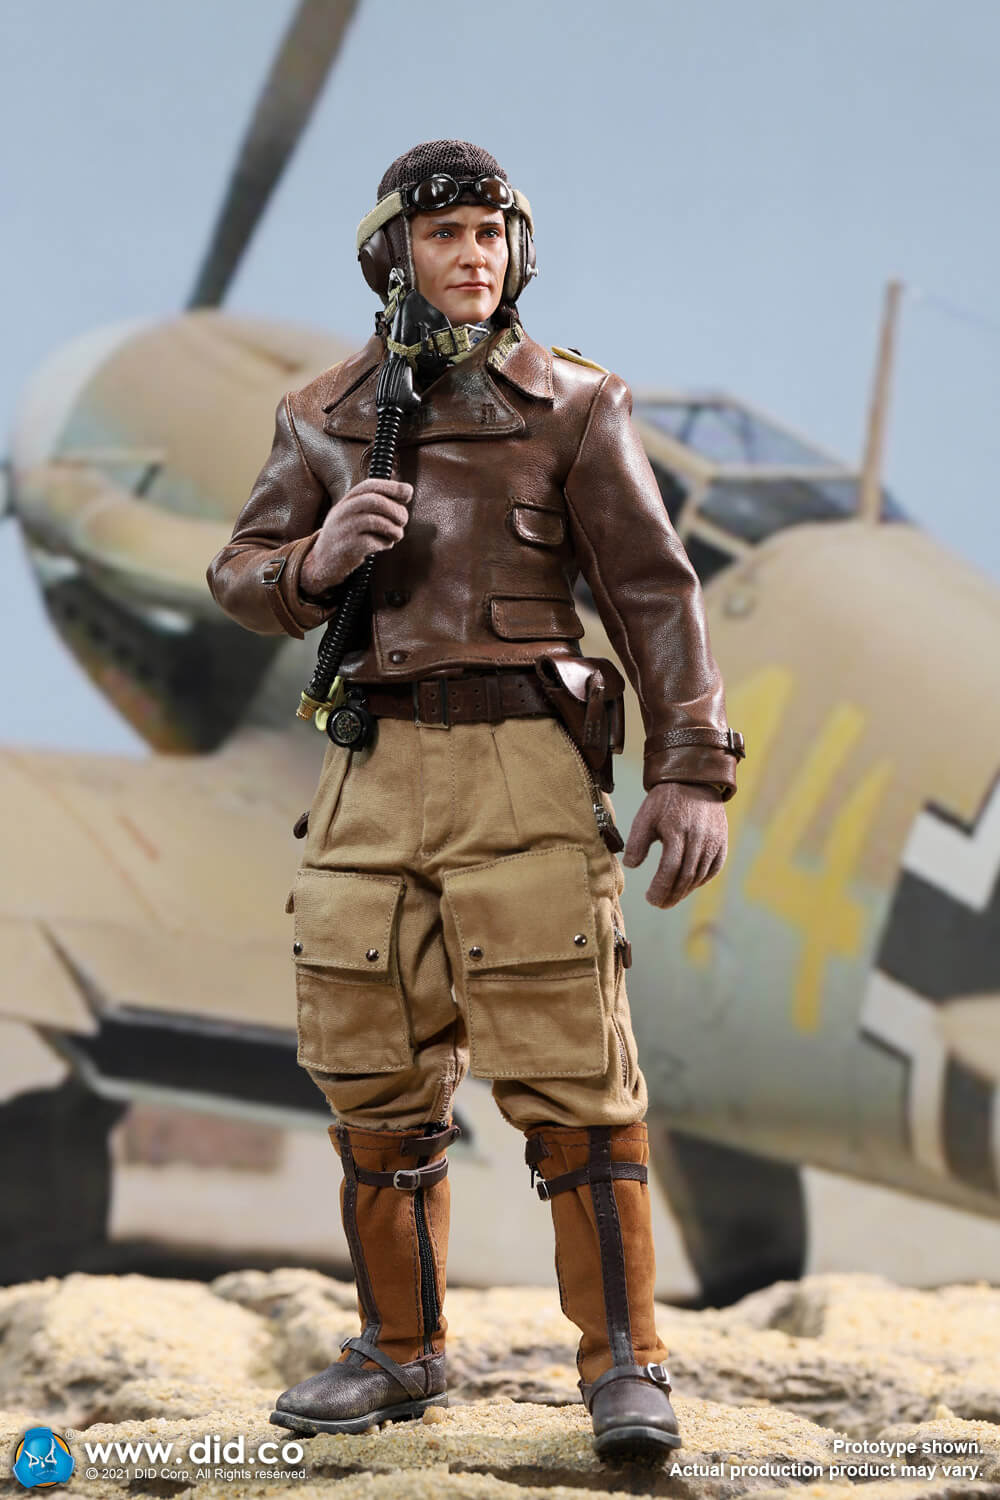 WWII - NEW PRODUCT: D80154 WWII German Luftwaffe Flying Ace “Star Of Africa” – Hans-Joachim Marseille & E60060  Diorama Of “Star Of Africa” 11575